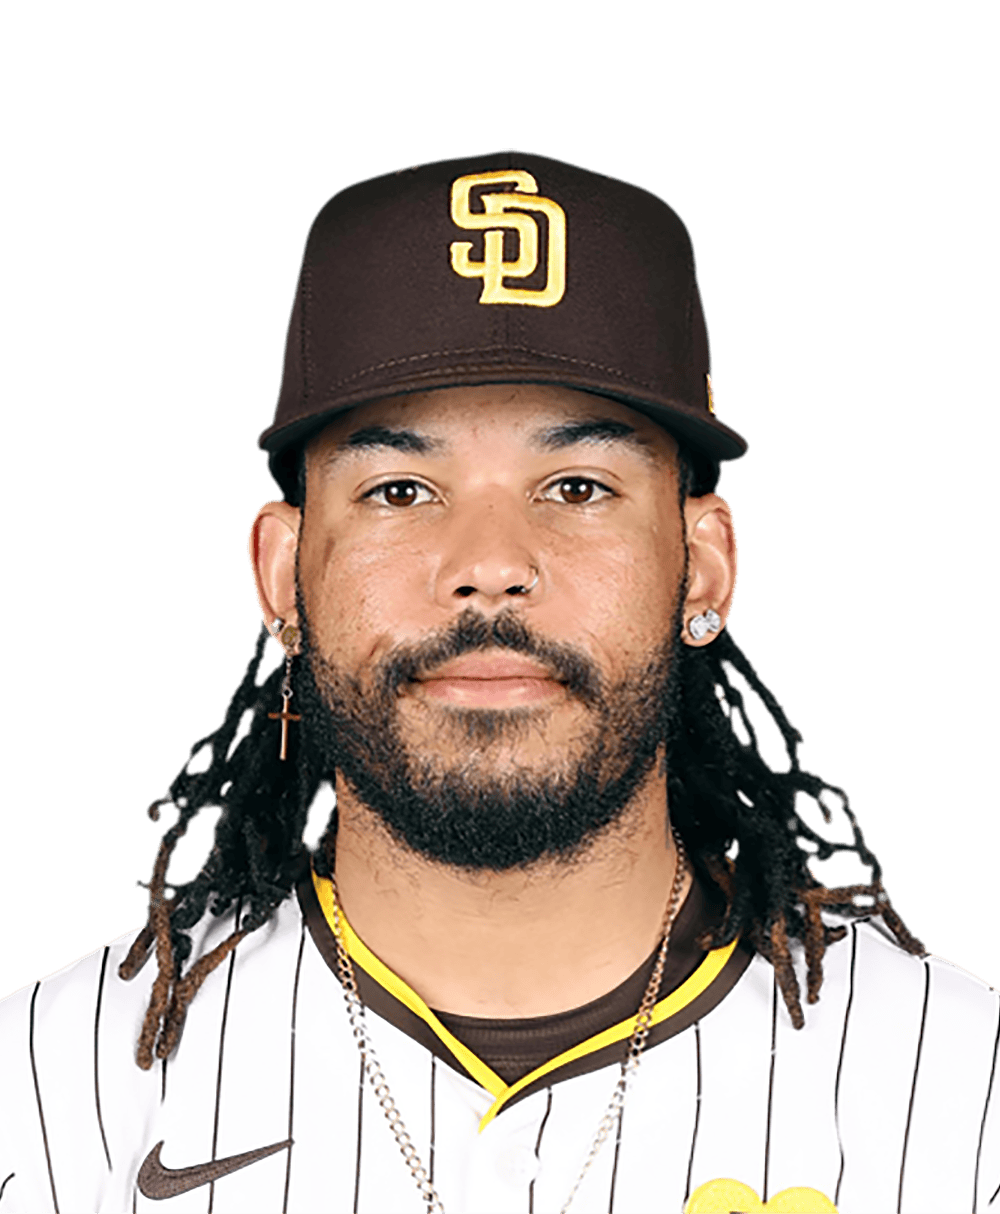 Gary Sánchez homers again as new Padres catcher goes deep for fourth time  in nine games with San Diego 